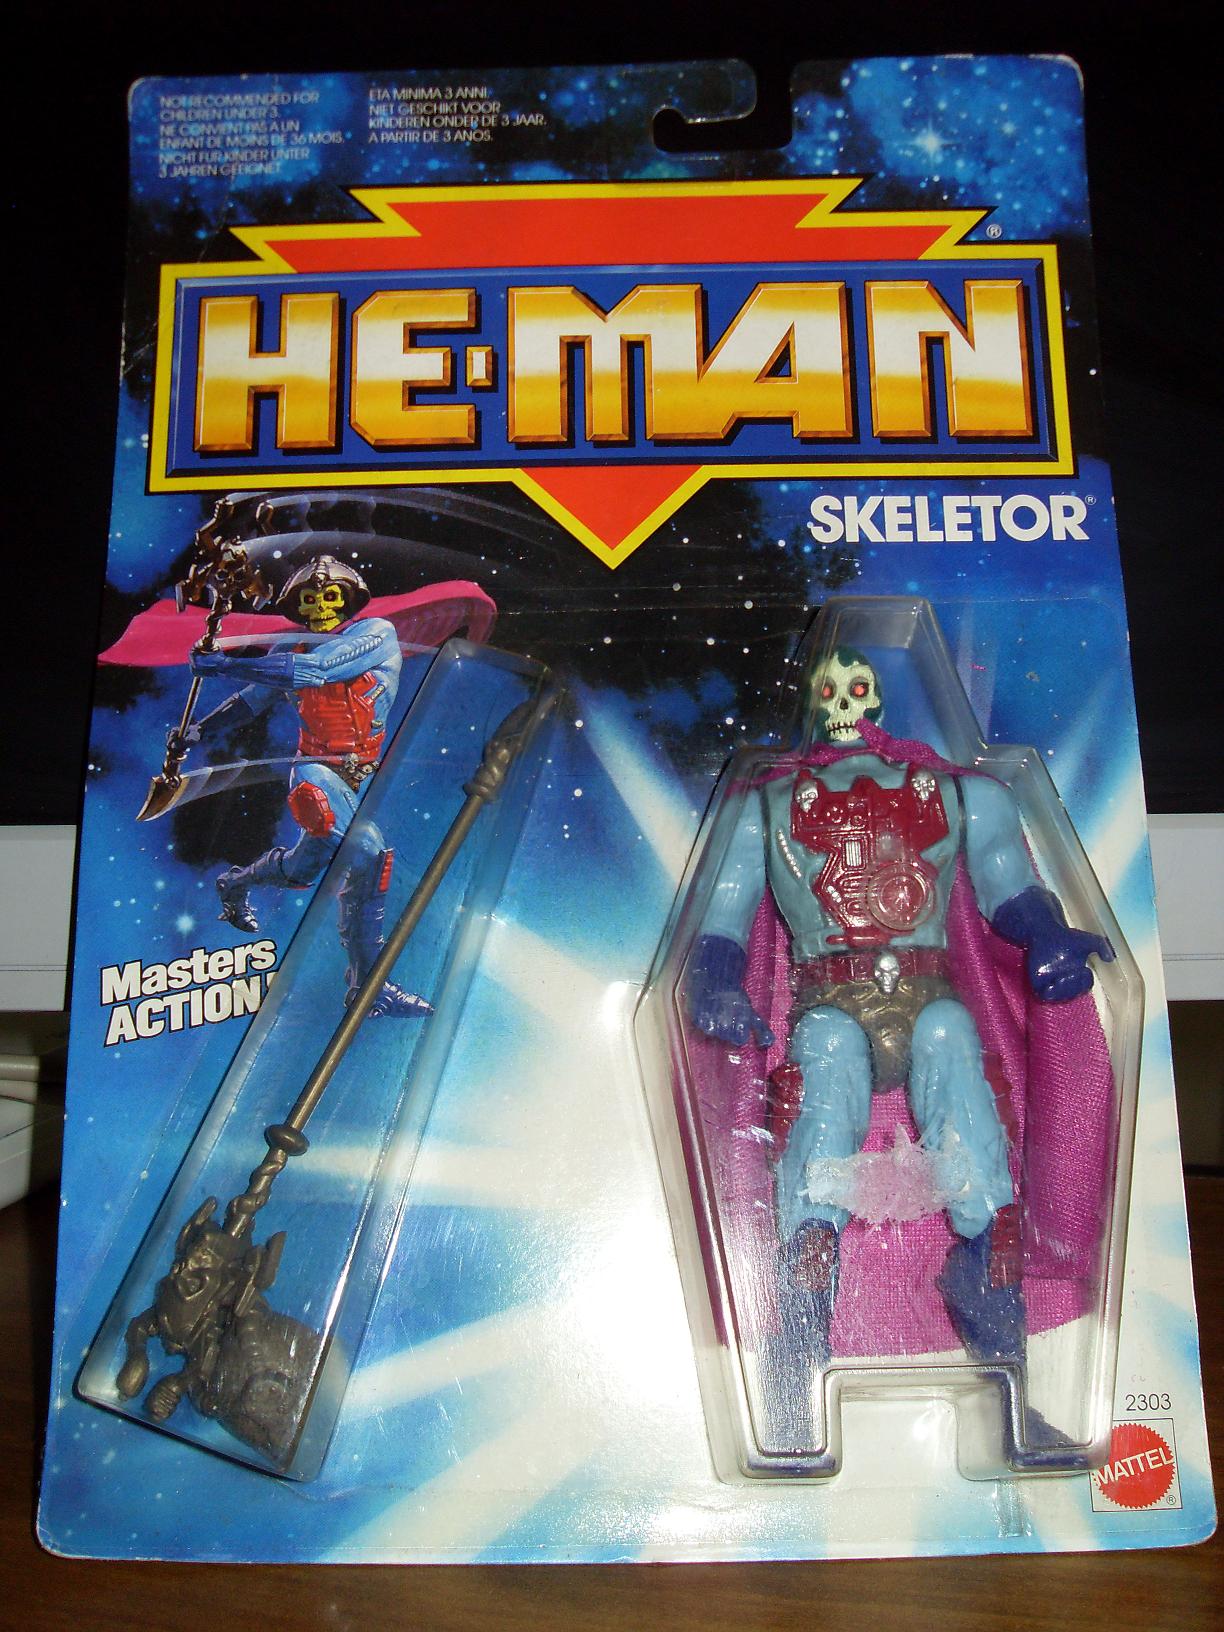 LORD HE-MAN Colecction 8431